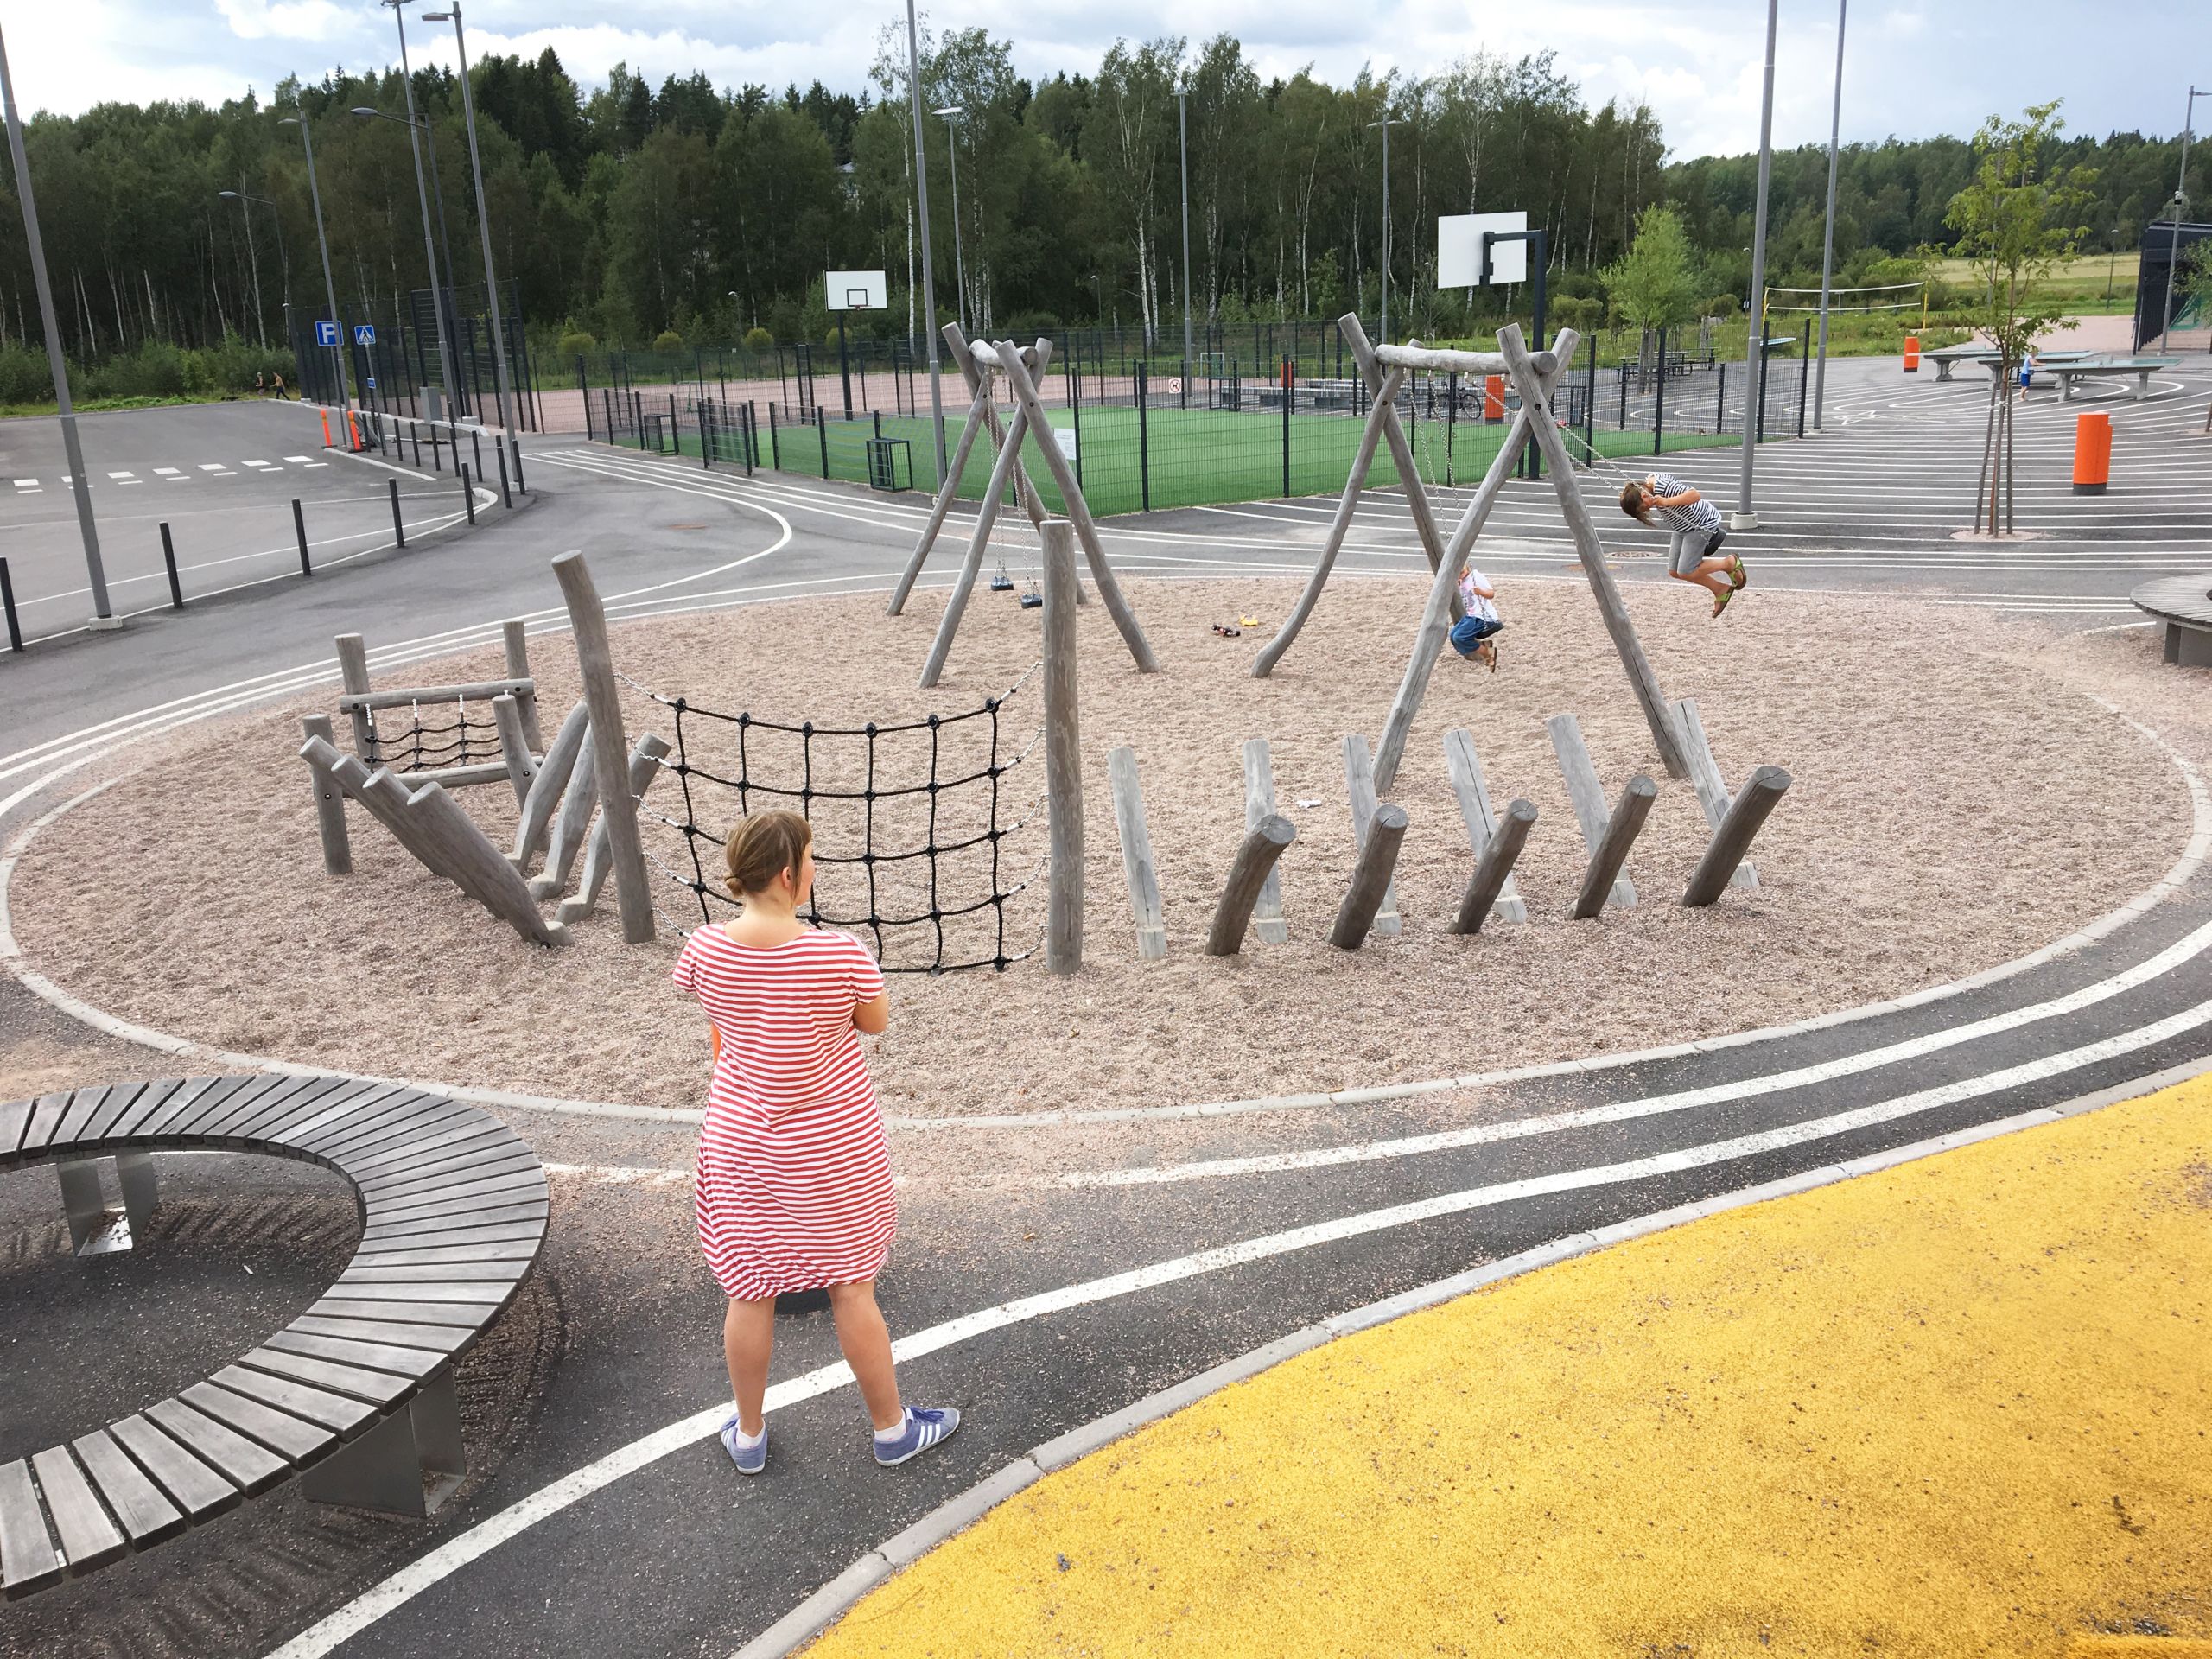 A parent supervising a child in a swing on a playground with wooden structures and sand. 